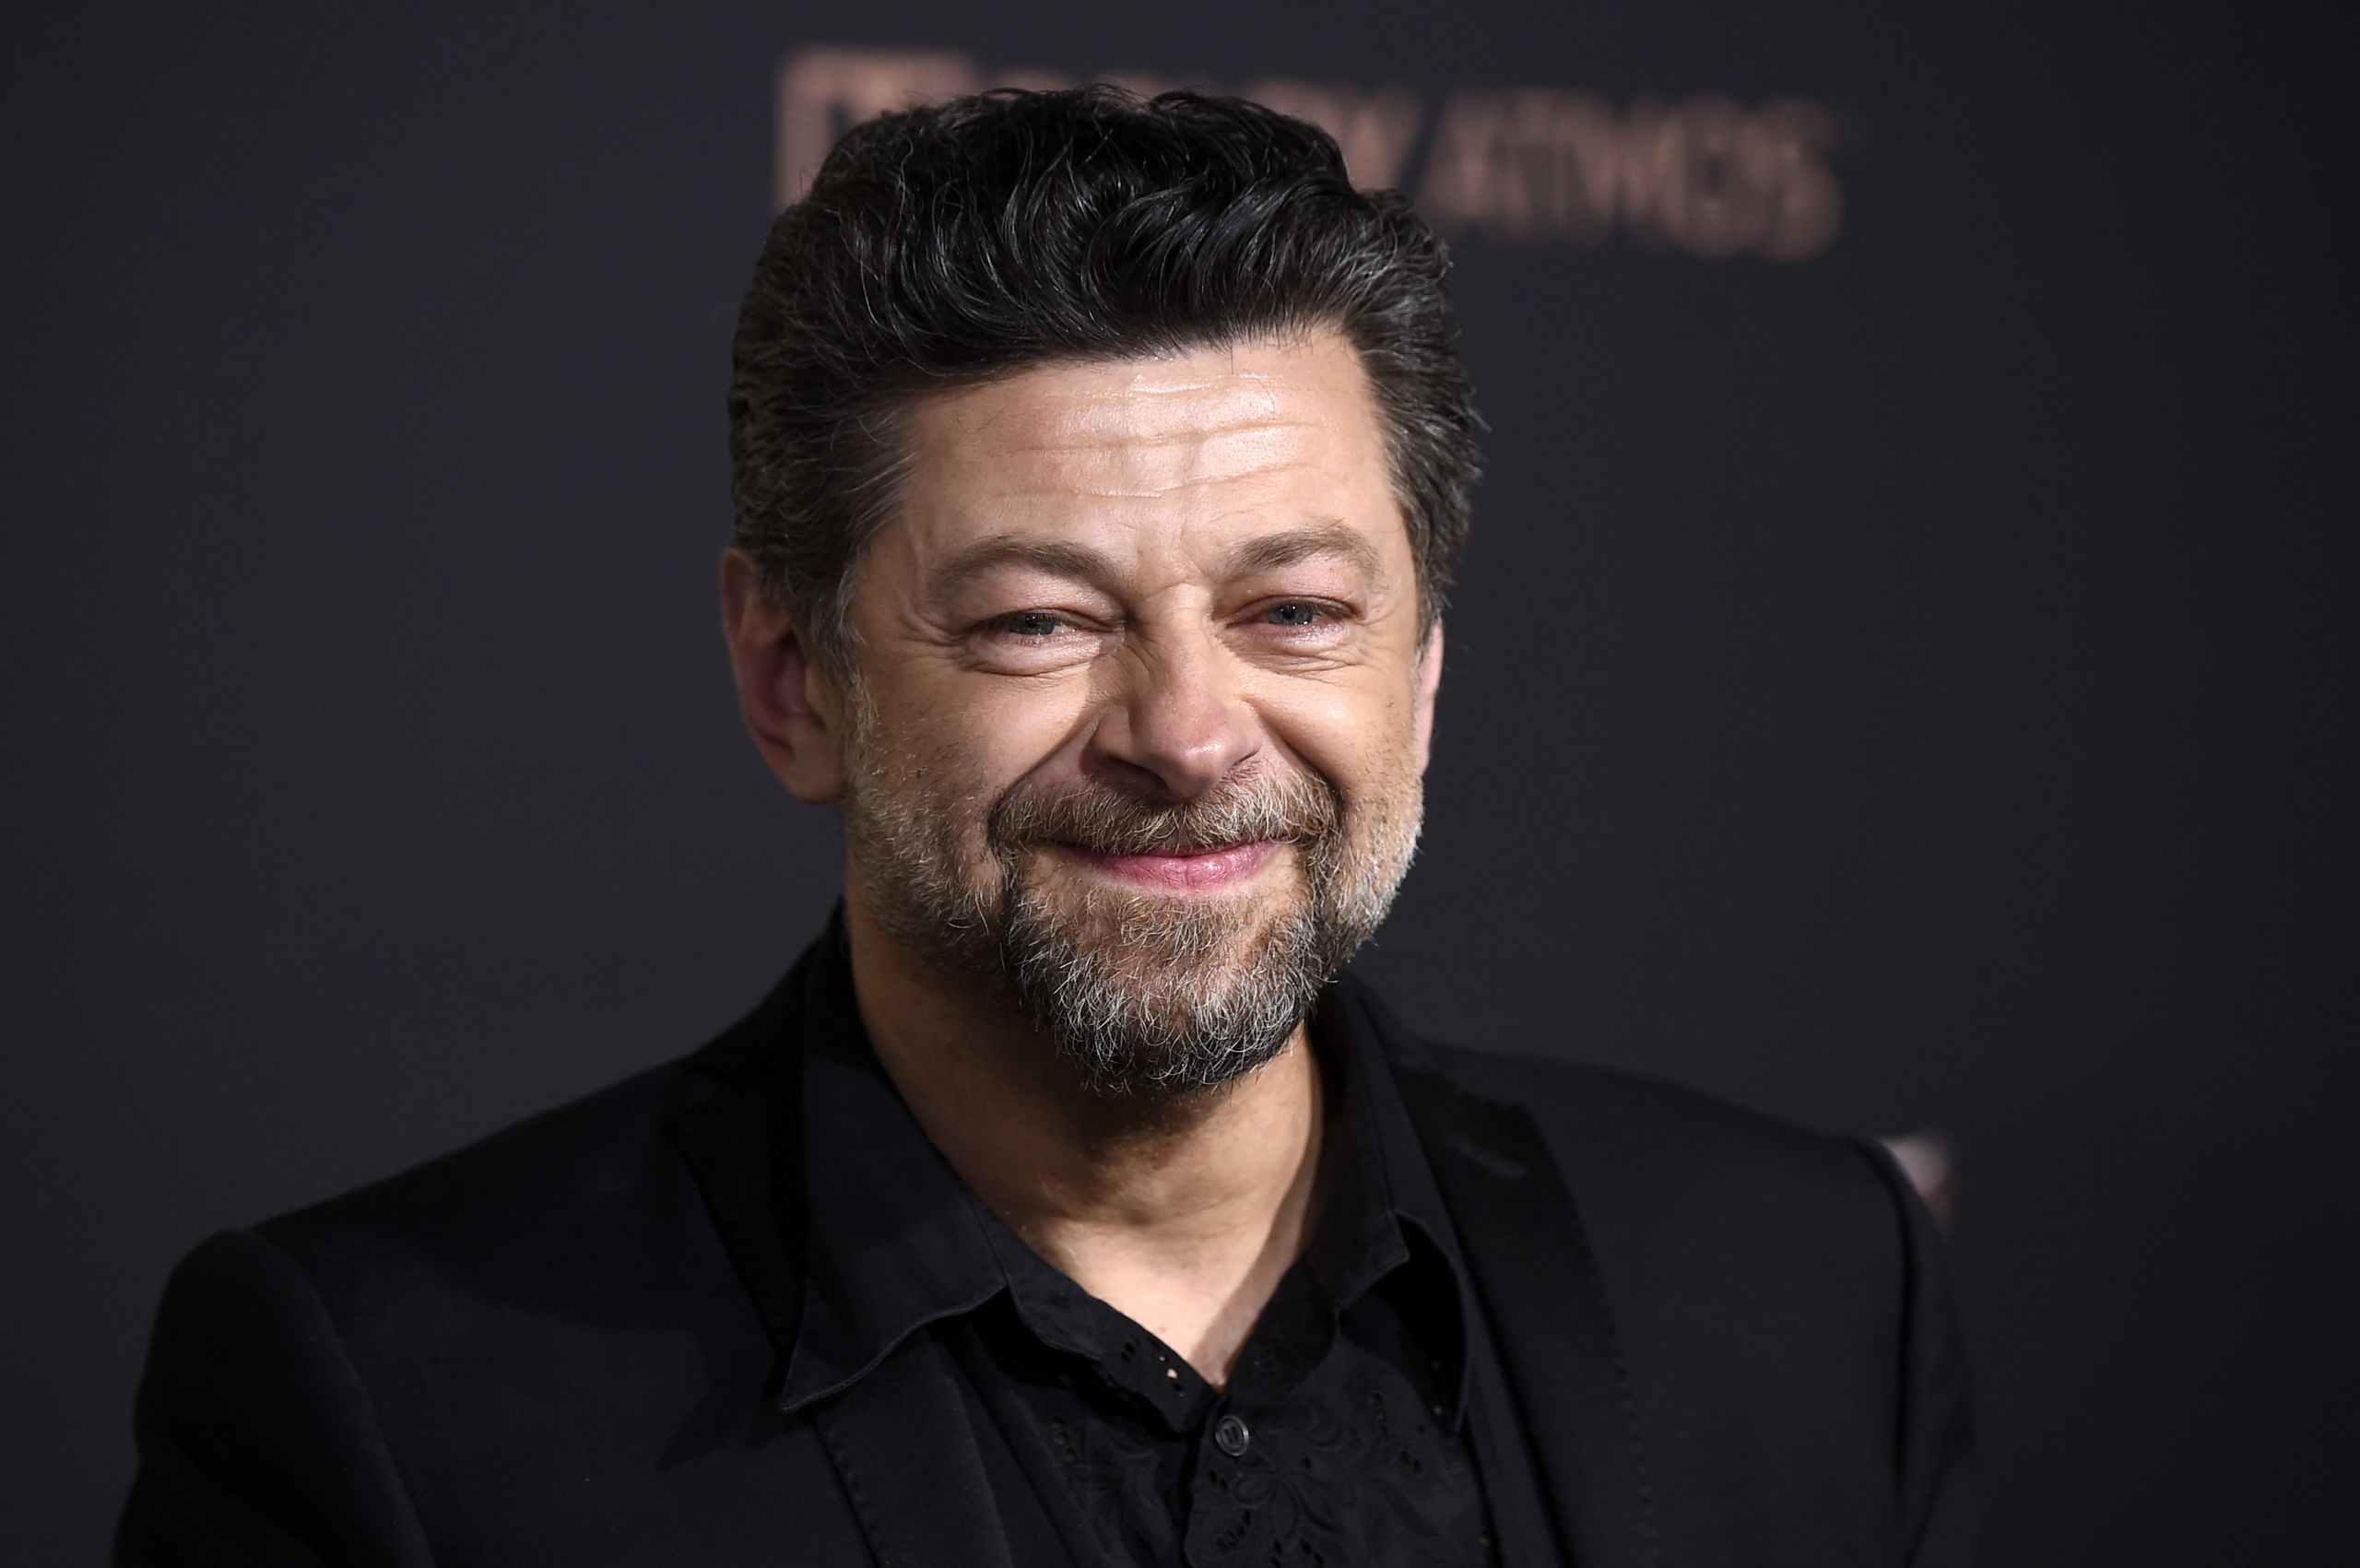 https://hips.hearstapps.com/hmg-prod.s3.amazonaws.com/images/actor-director-andy-serkis-attends-the-premiere-of-new-line-news-photo-1581677943.jpg?resize=2560:*